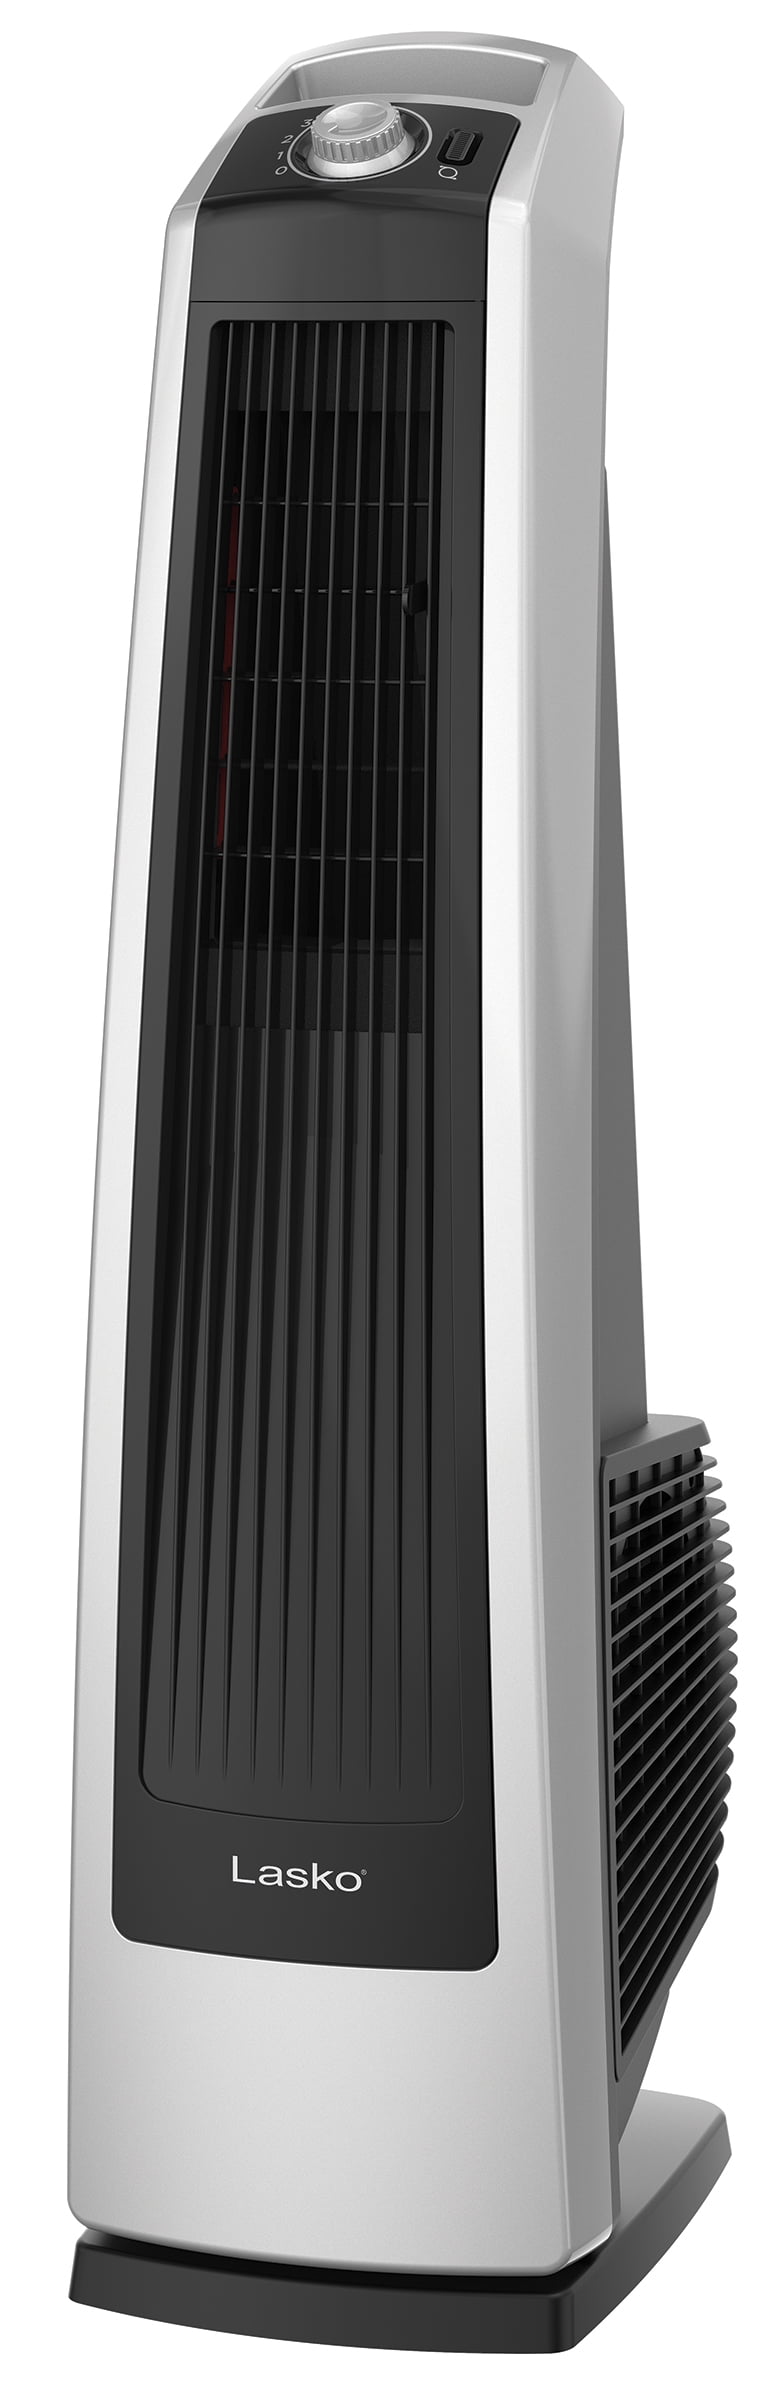 Oscillating Tower Fan With Remote High Velocity Blower Fan Cooler Floor 3 Speed 